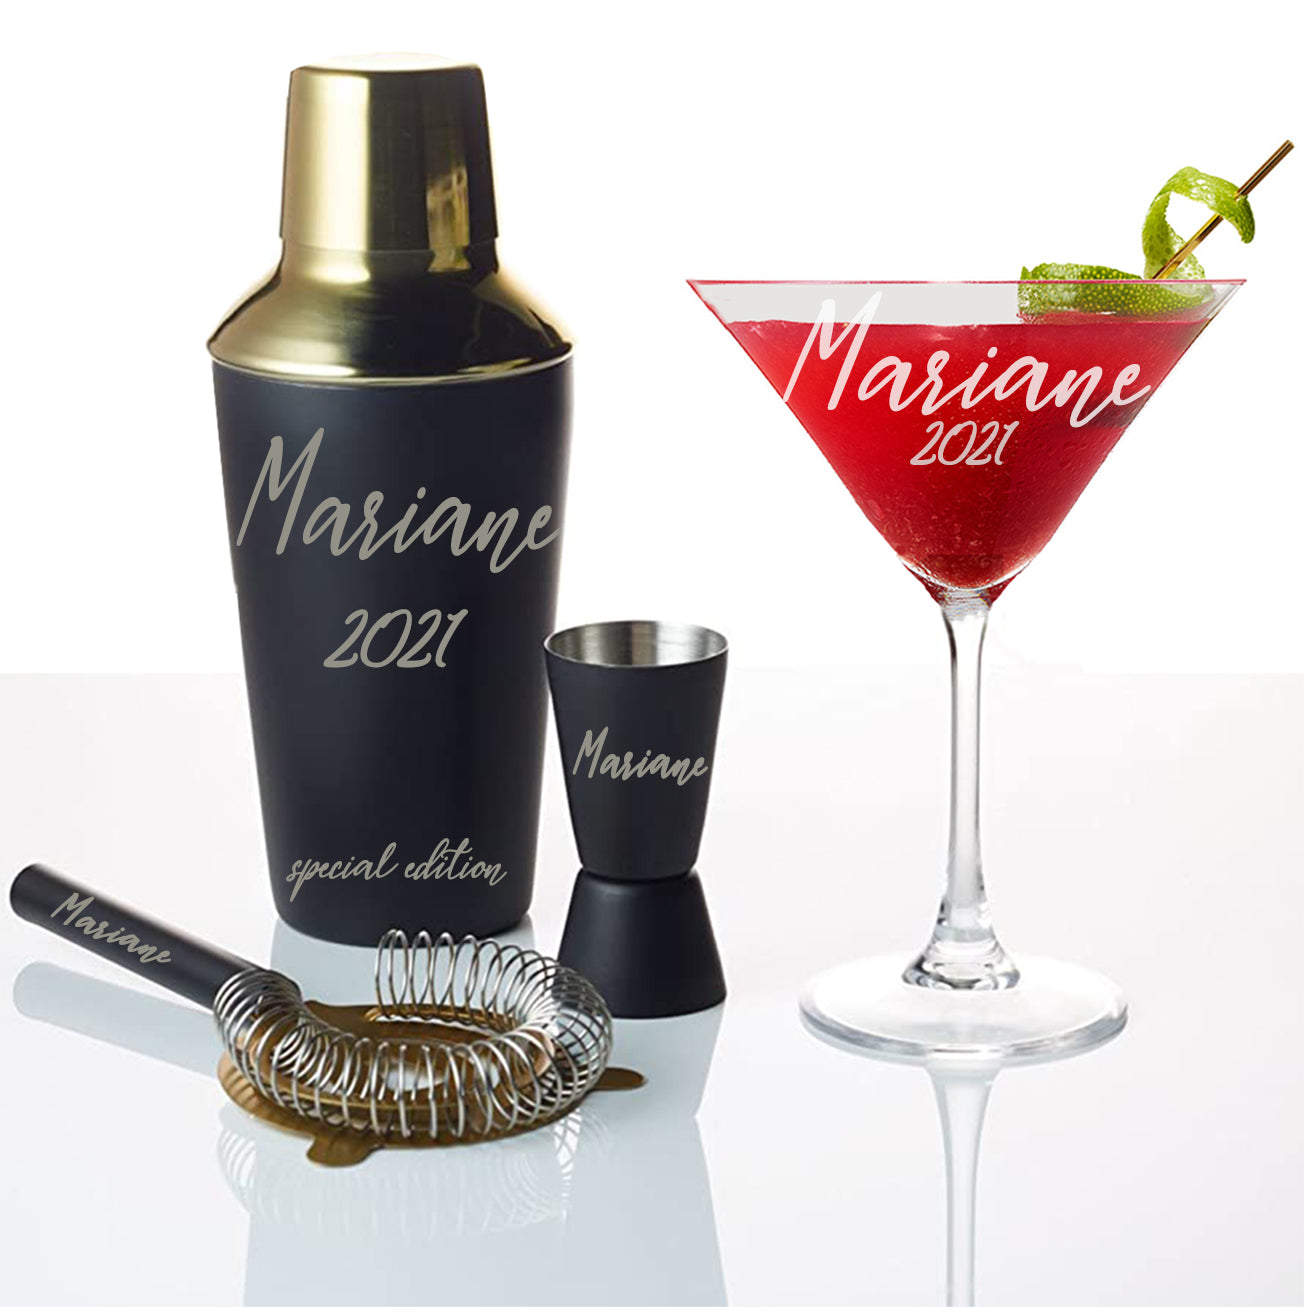 Personalized Cocktail Shaker and Cocktail glass - aartsengravery